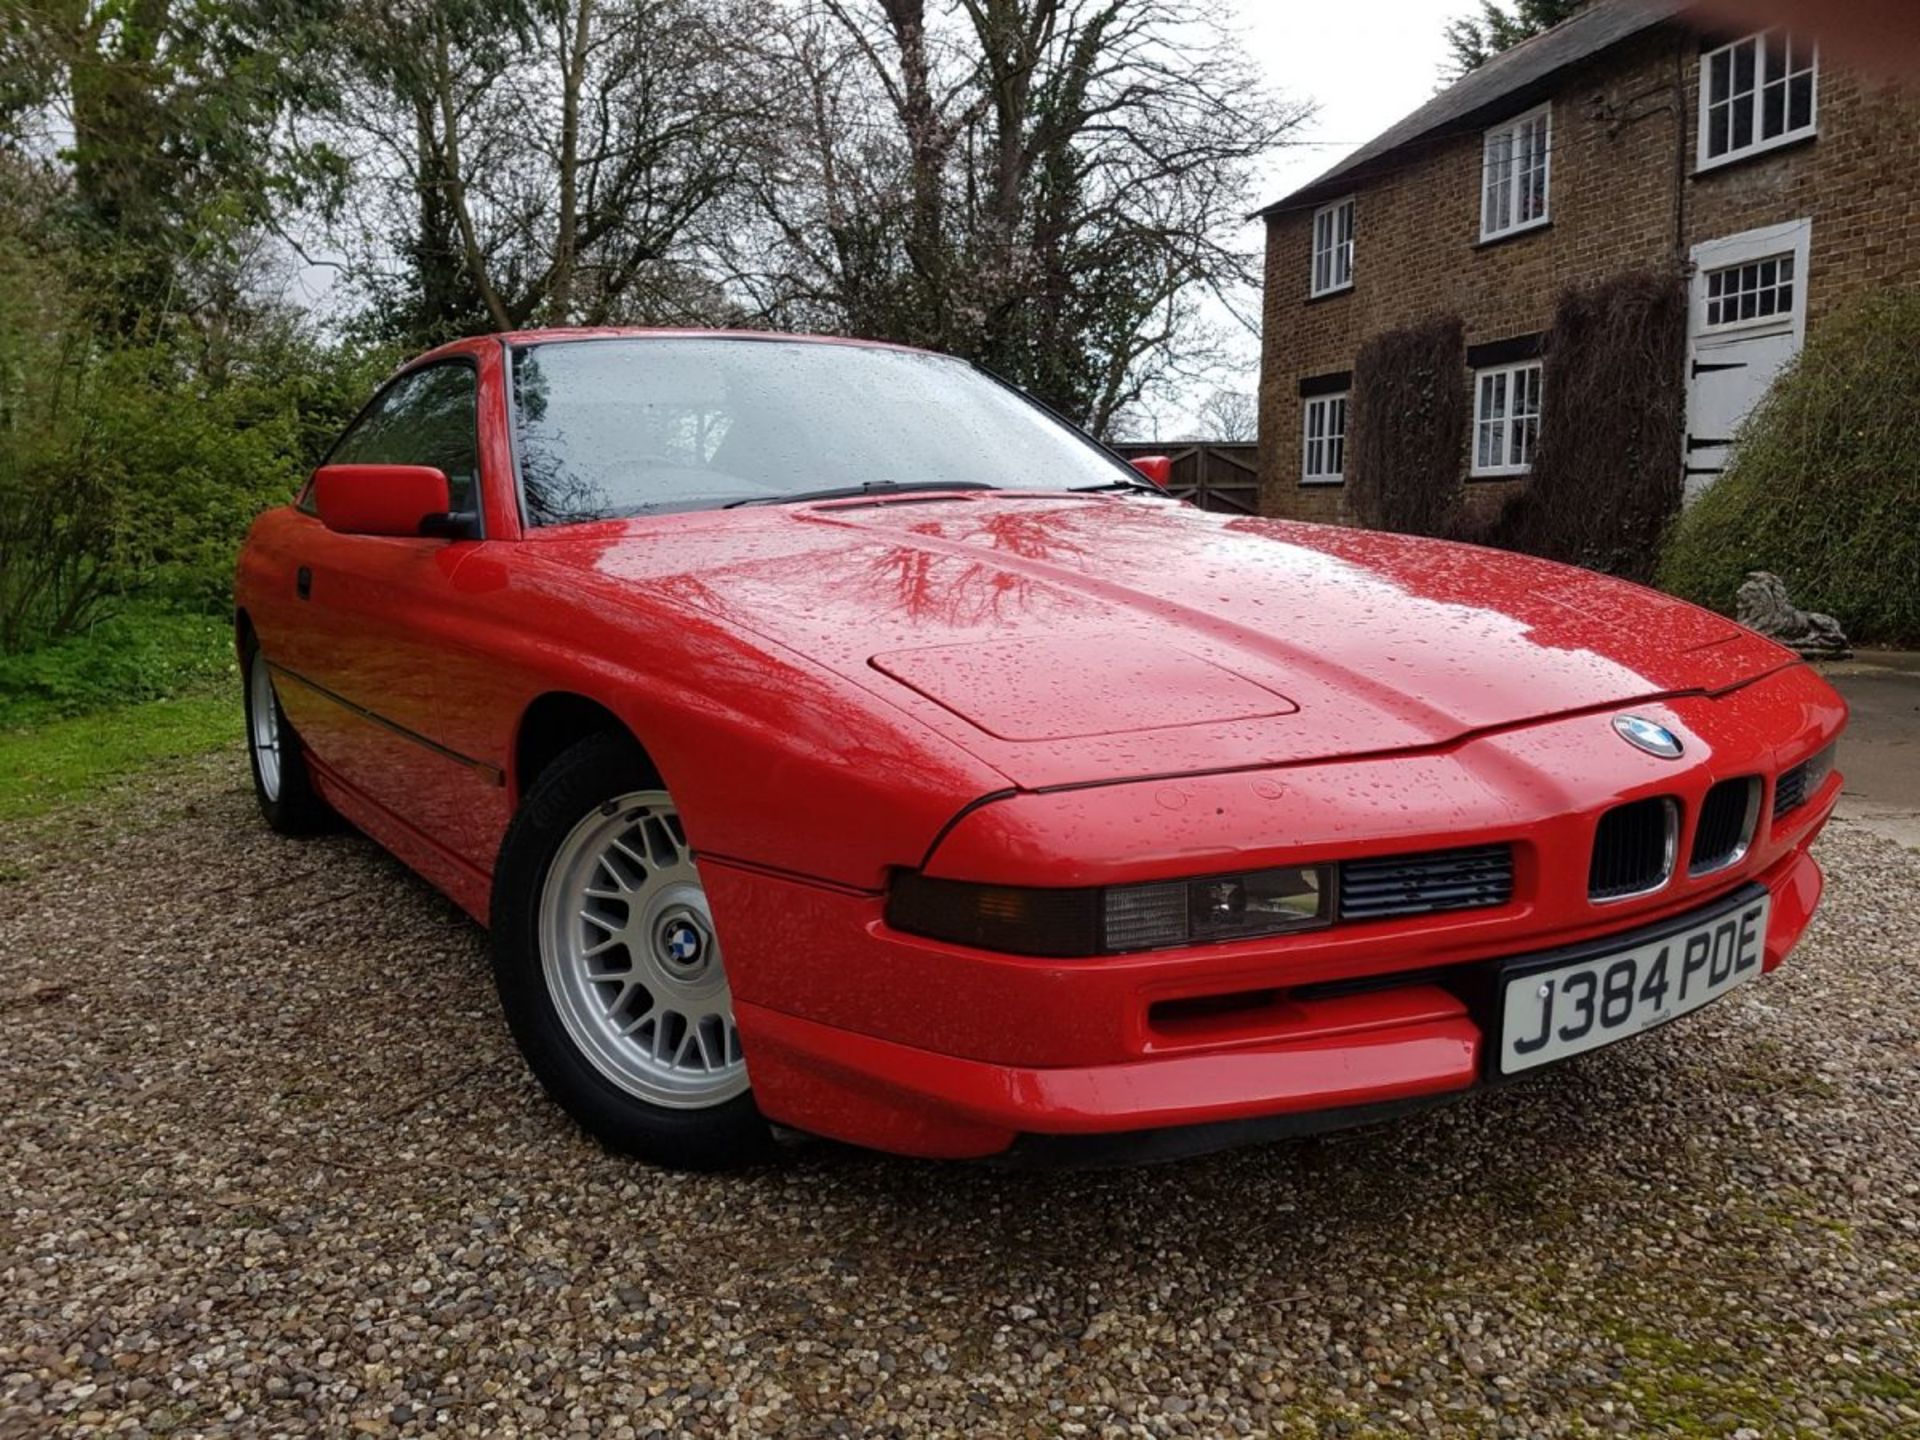 BMW 850i Same owner for the last 20 years. 1991 - This very pretty BMW 850i comes to us having